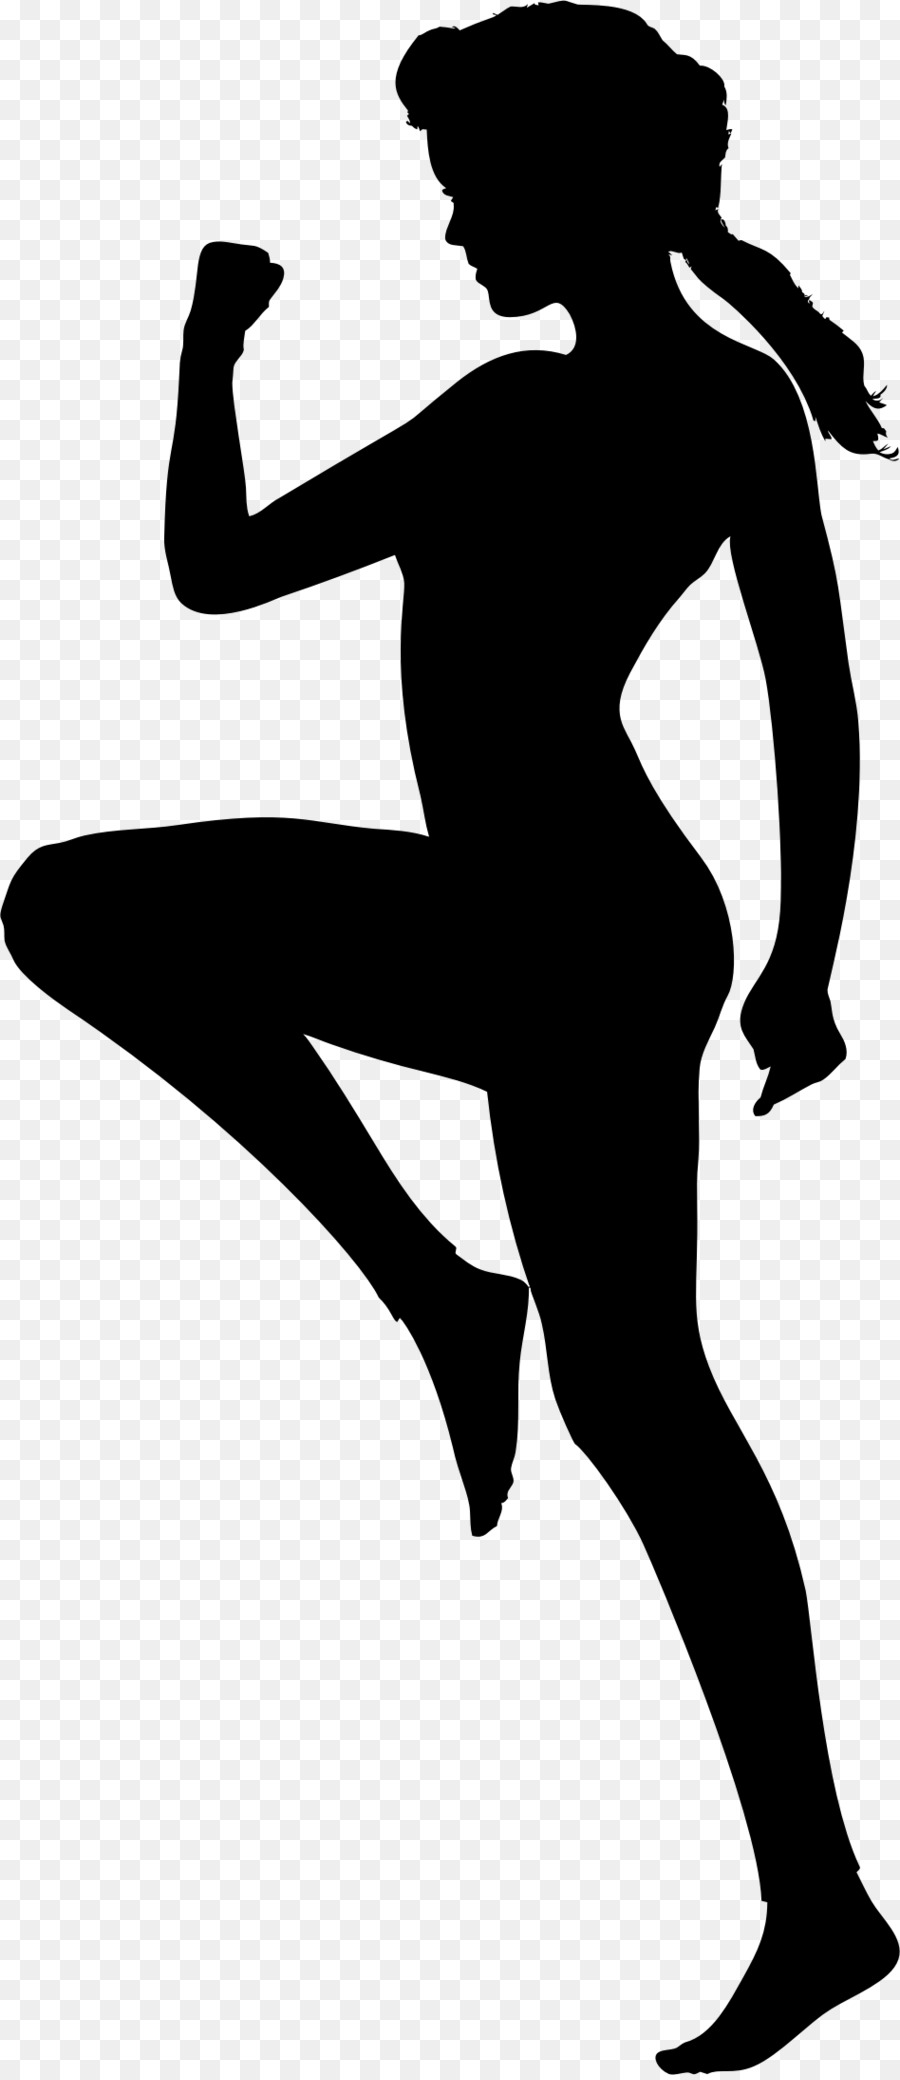 Physical exercise Woman Silhouette Physical fitness Clip art - SILUET png download - 948*2186 - Free Transparent Physical Exercise png Download.